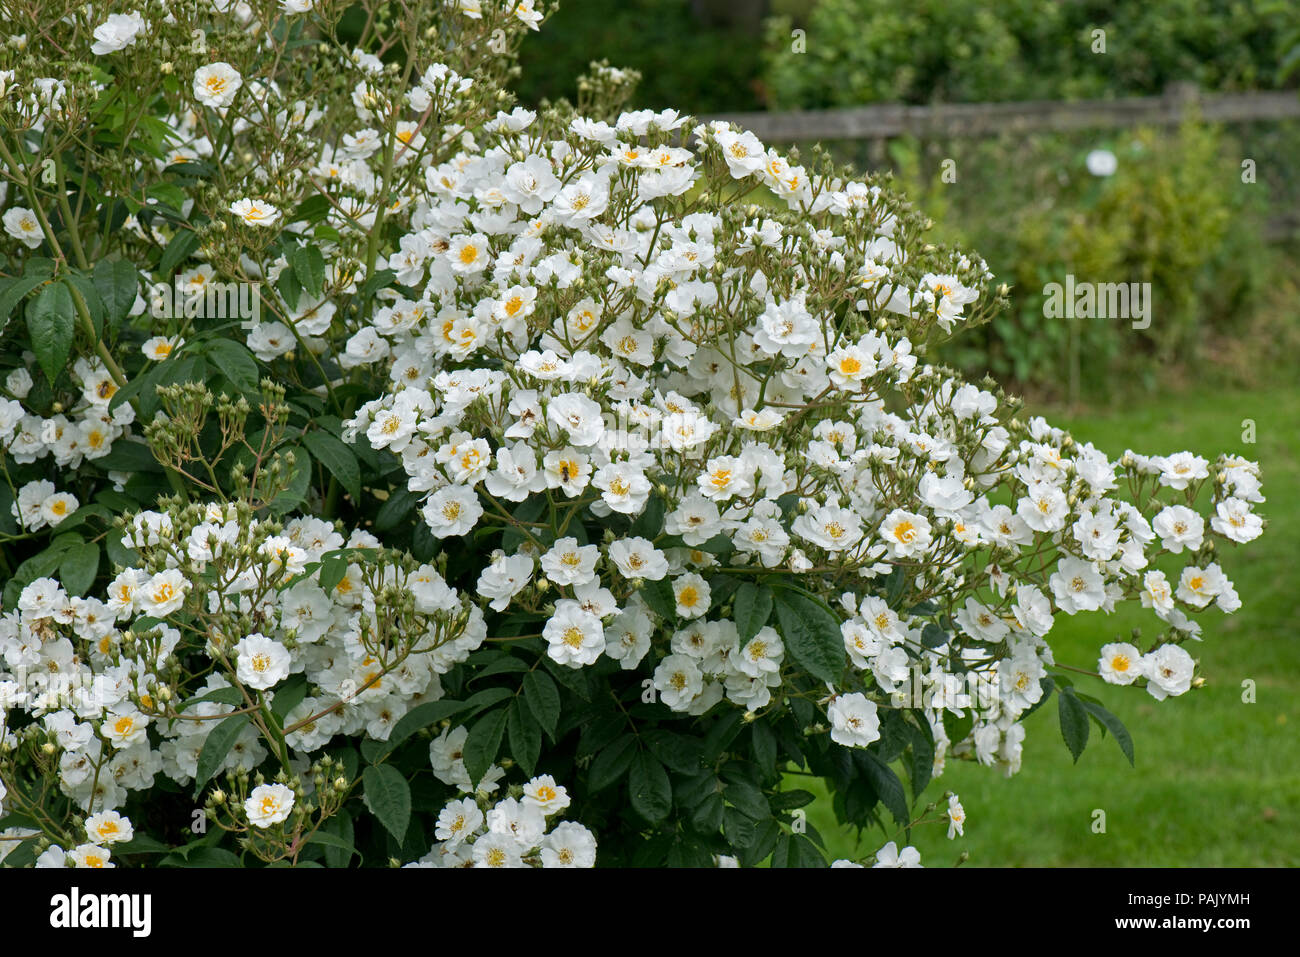 White rambling, climbing rose 'Rambling Rector' with profuse flowers with yellow centres.  Attractive to bees and other pollinators. Stock Photo